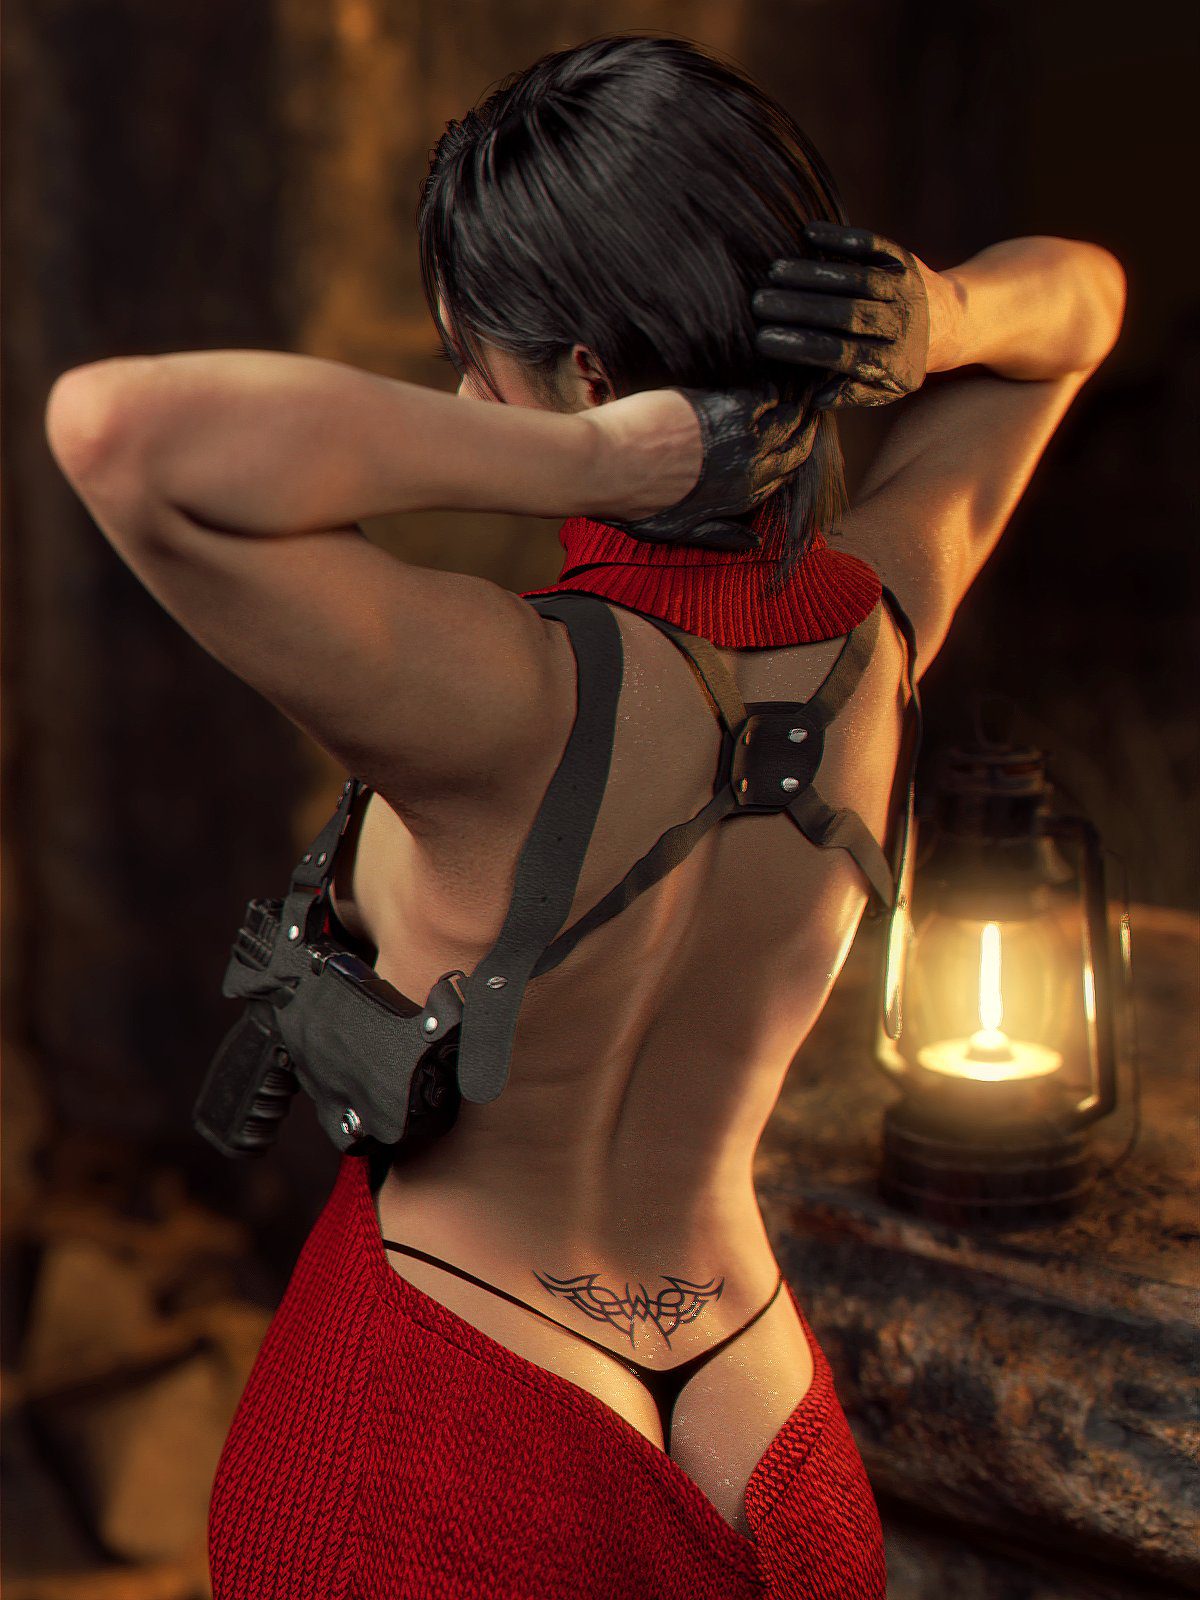 resident-evil-porn-–-thong,-leather-gloves,-exposed-panties,-no-bra,-red-dress